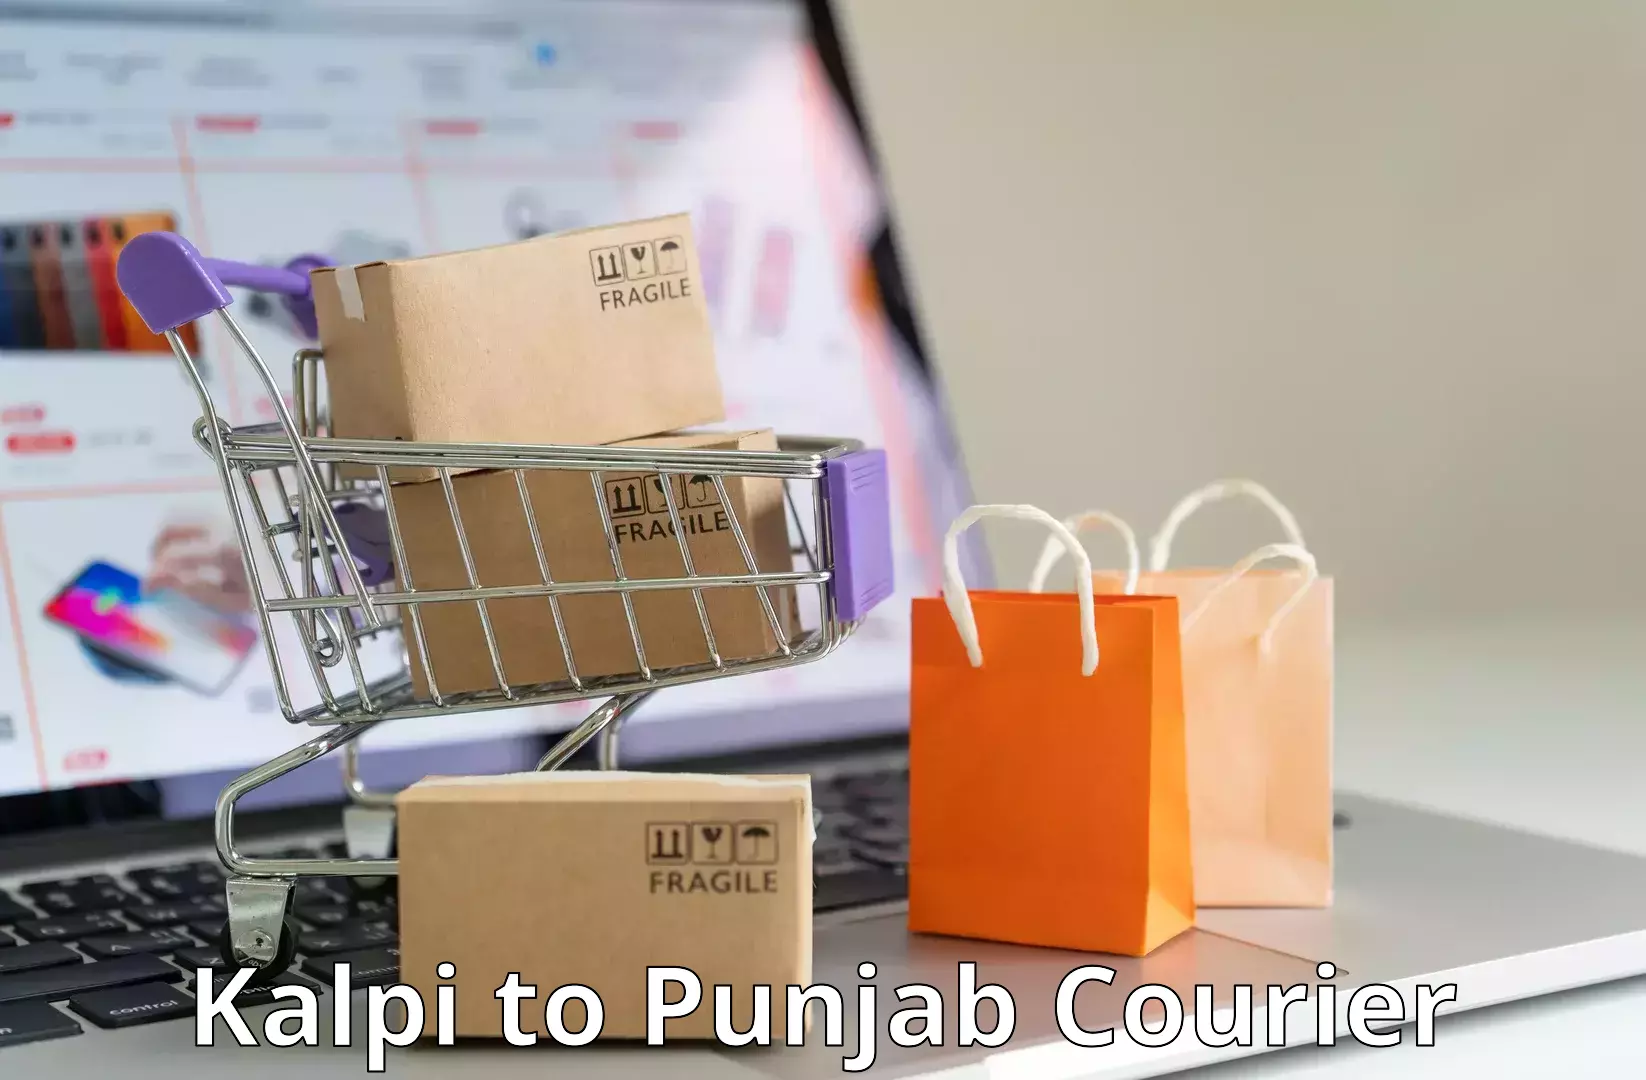 Multi-national courier services Kalpi to Ludhiana